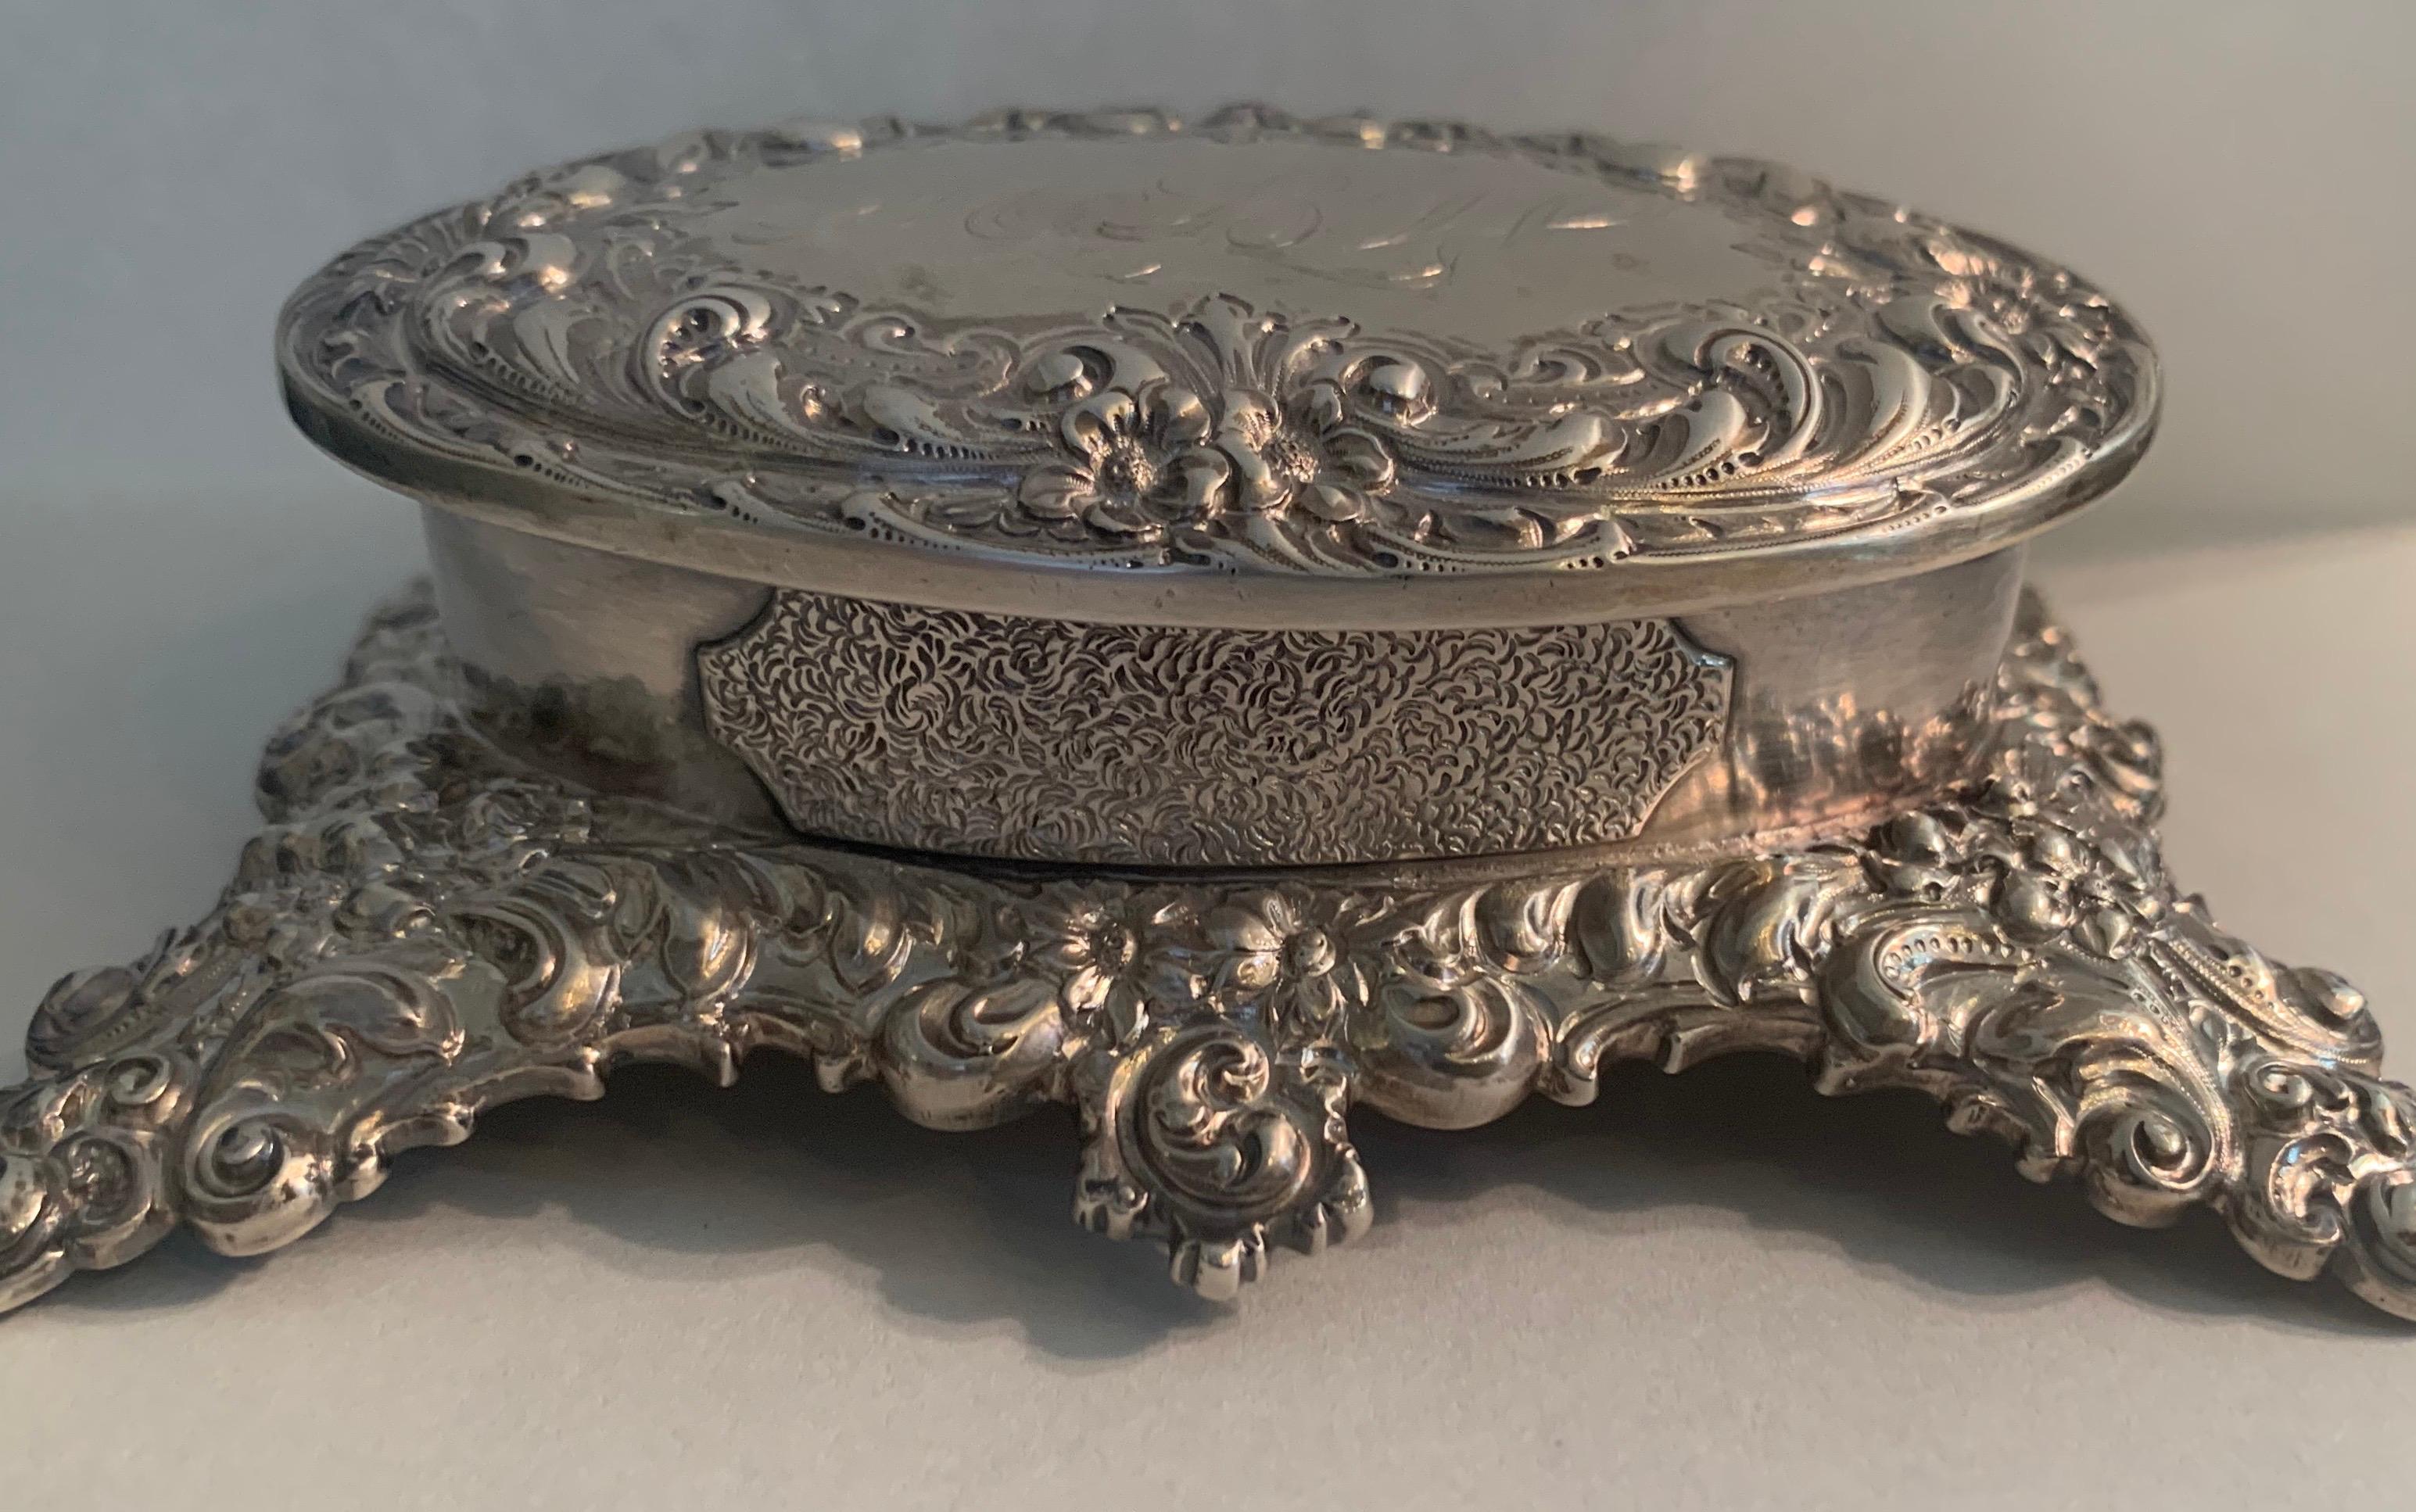 A wonderful Bailey Banks & Biddle Company sterling oval jewelry keepsake footed box.